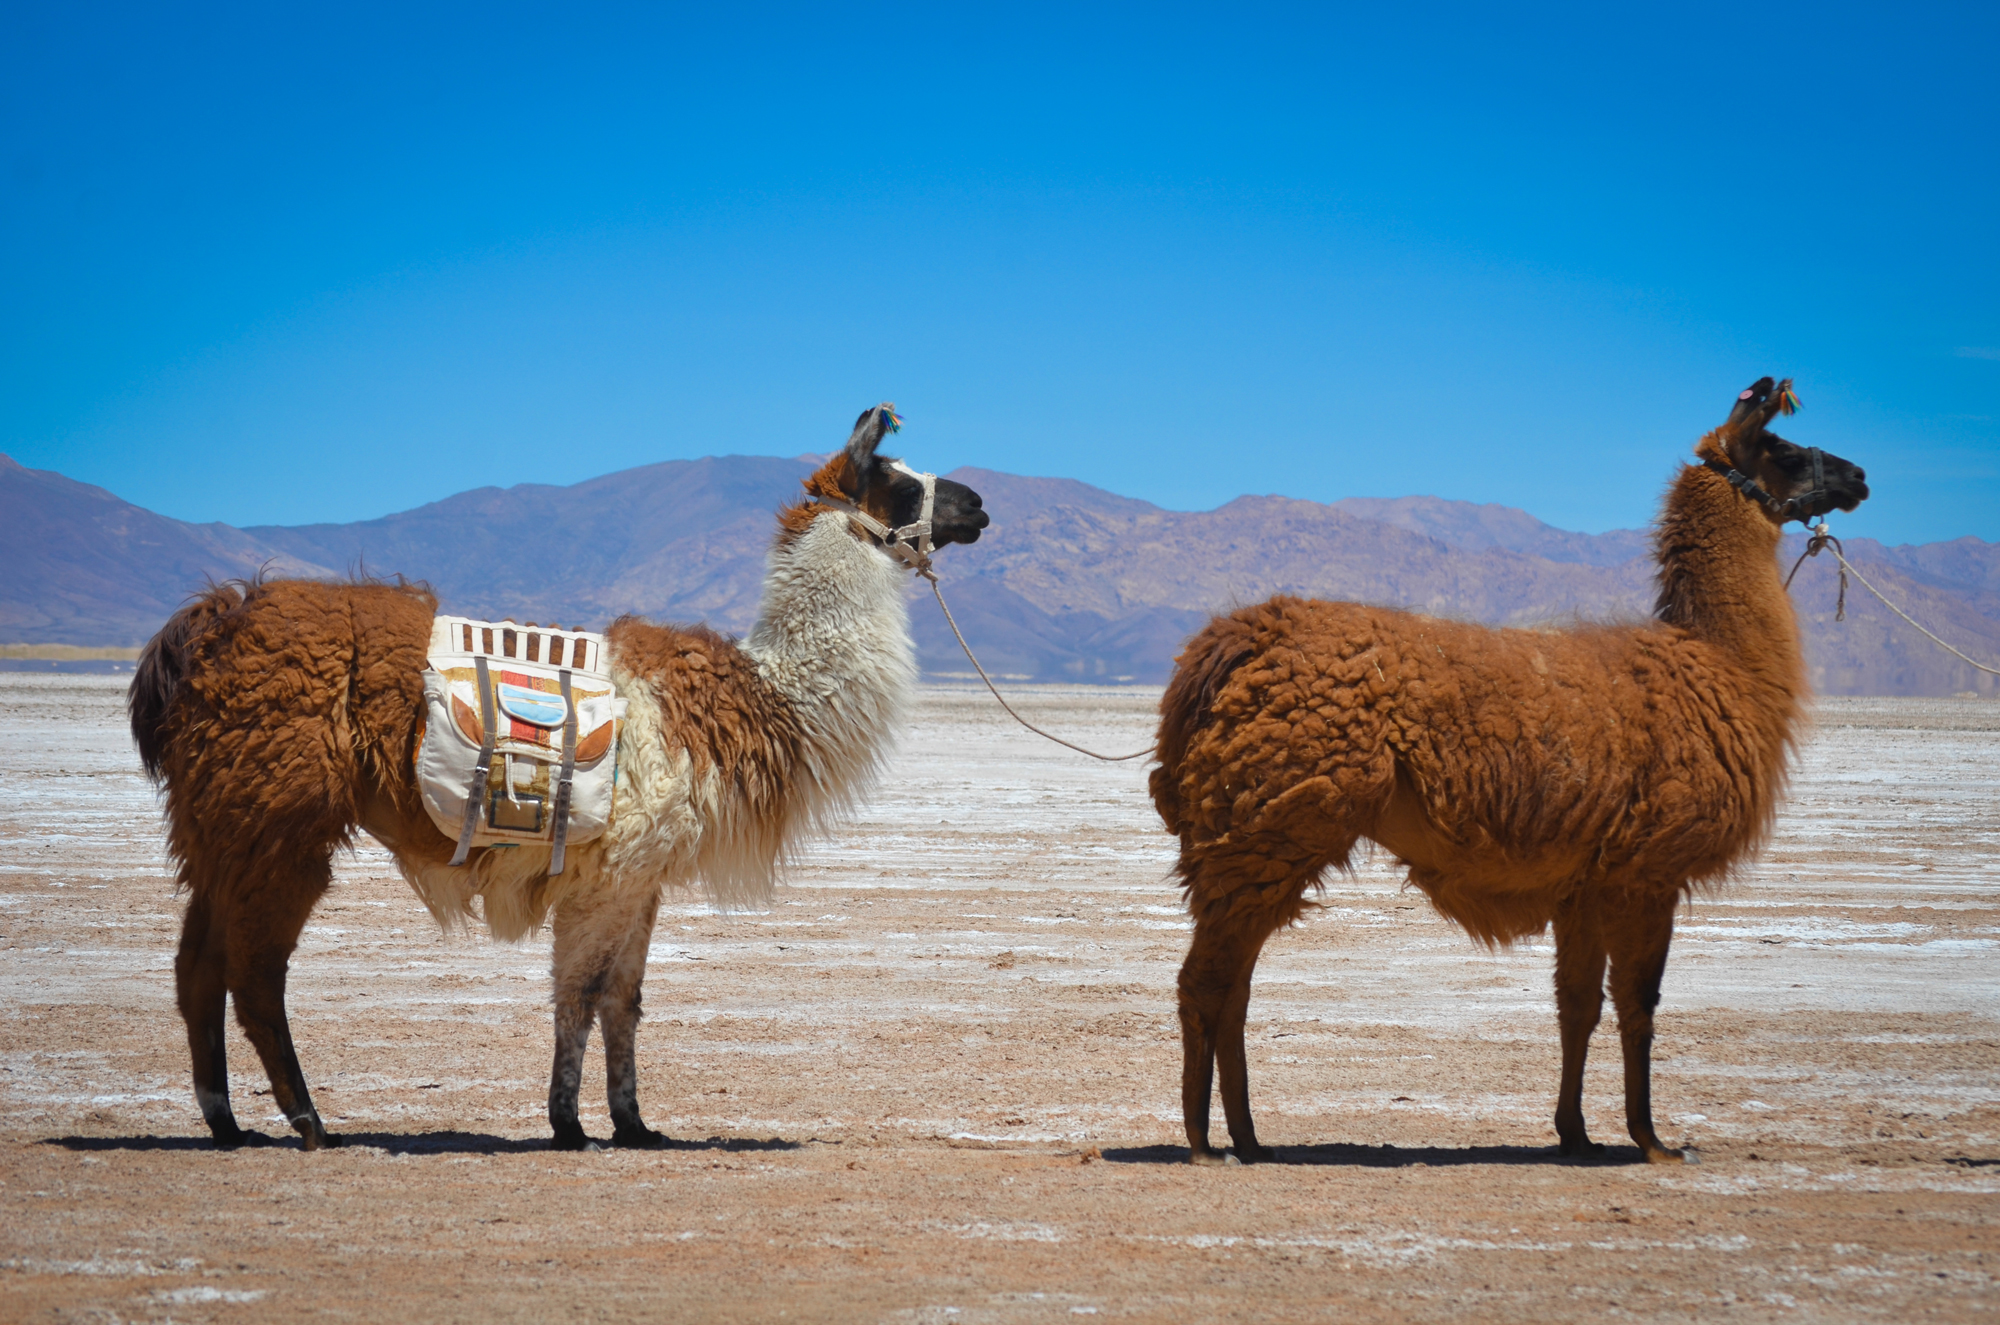 Two llamas on the high plateau of the Andes